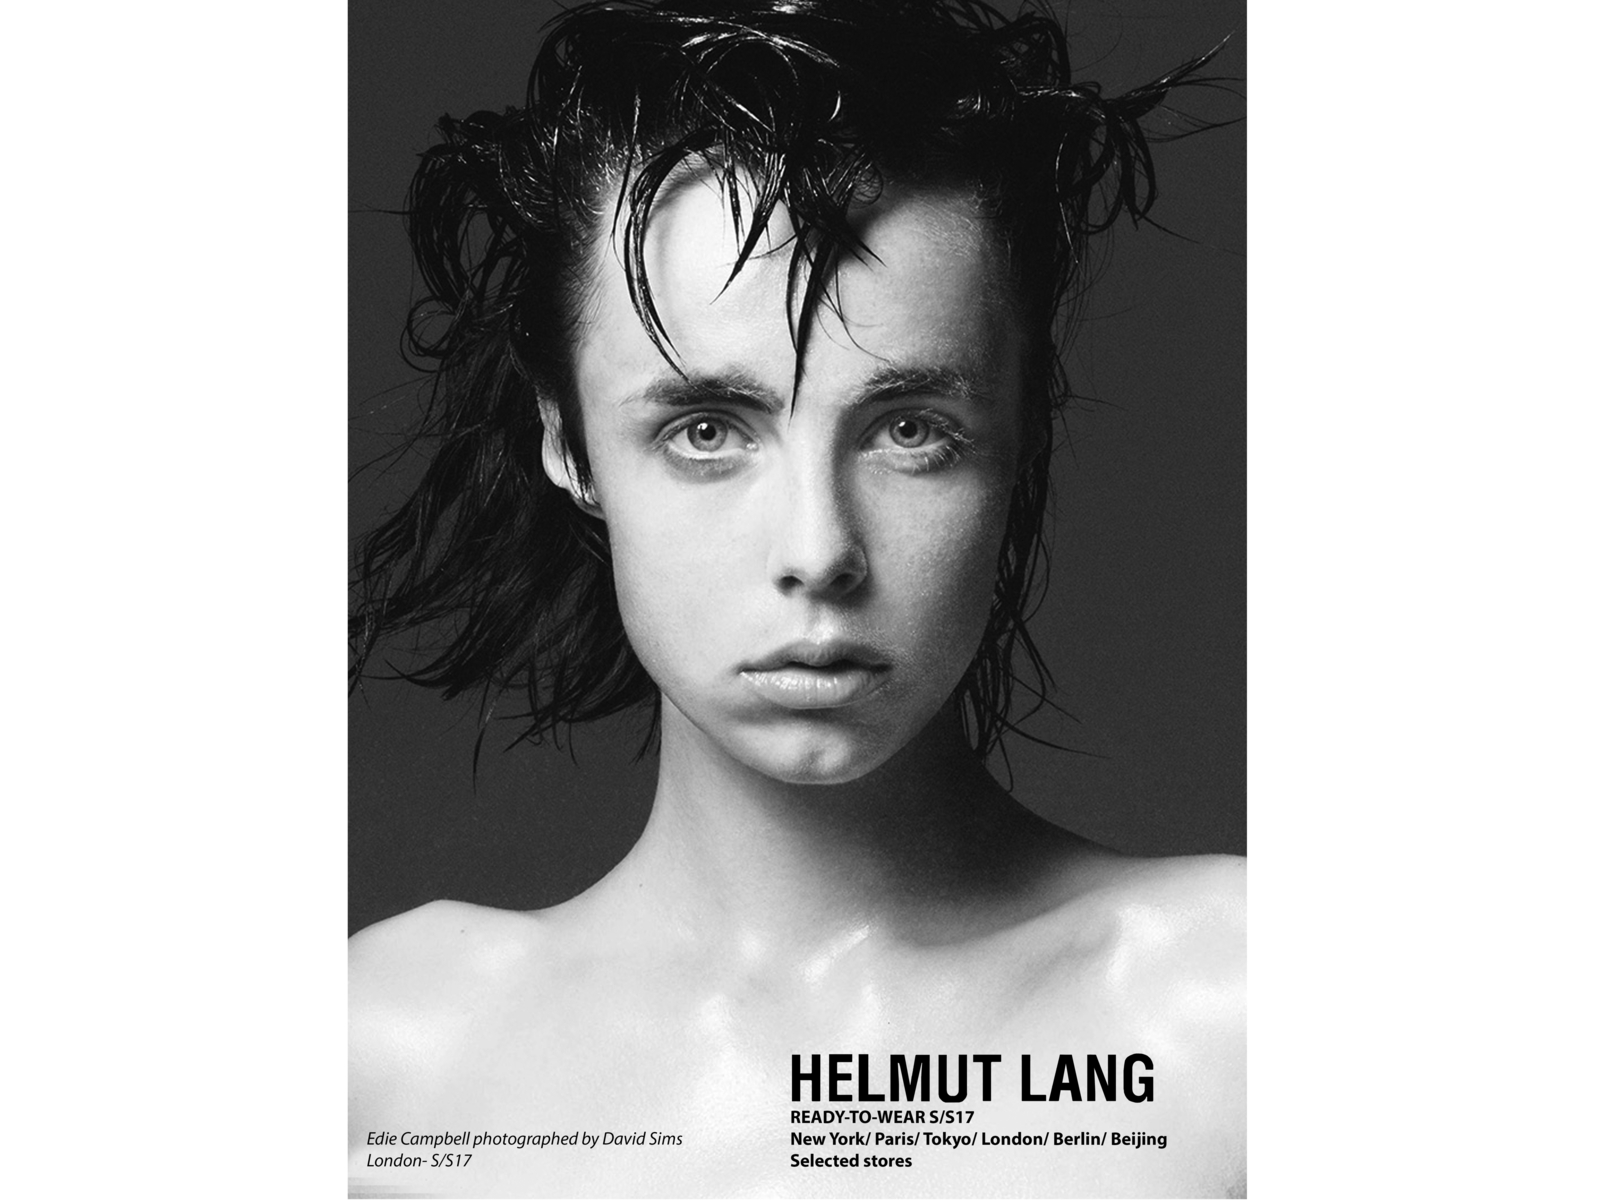 Helmut Lang Advertising Concept (David Sims) by Chipo Mapondera on